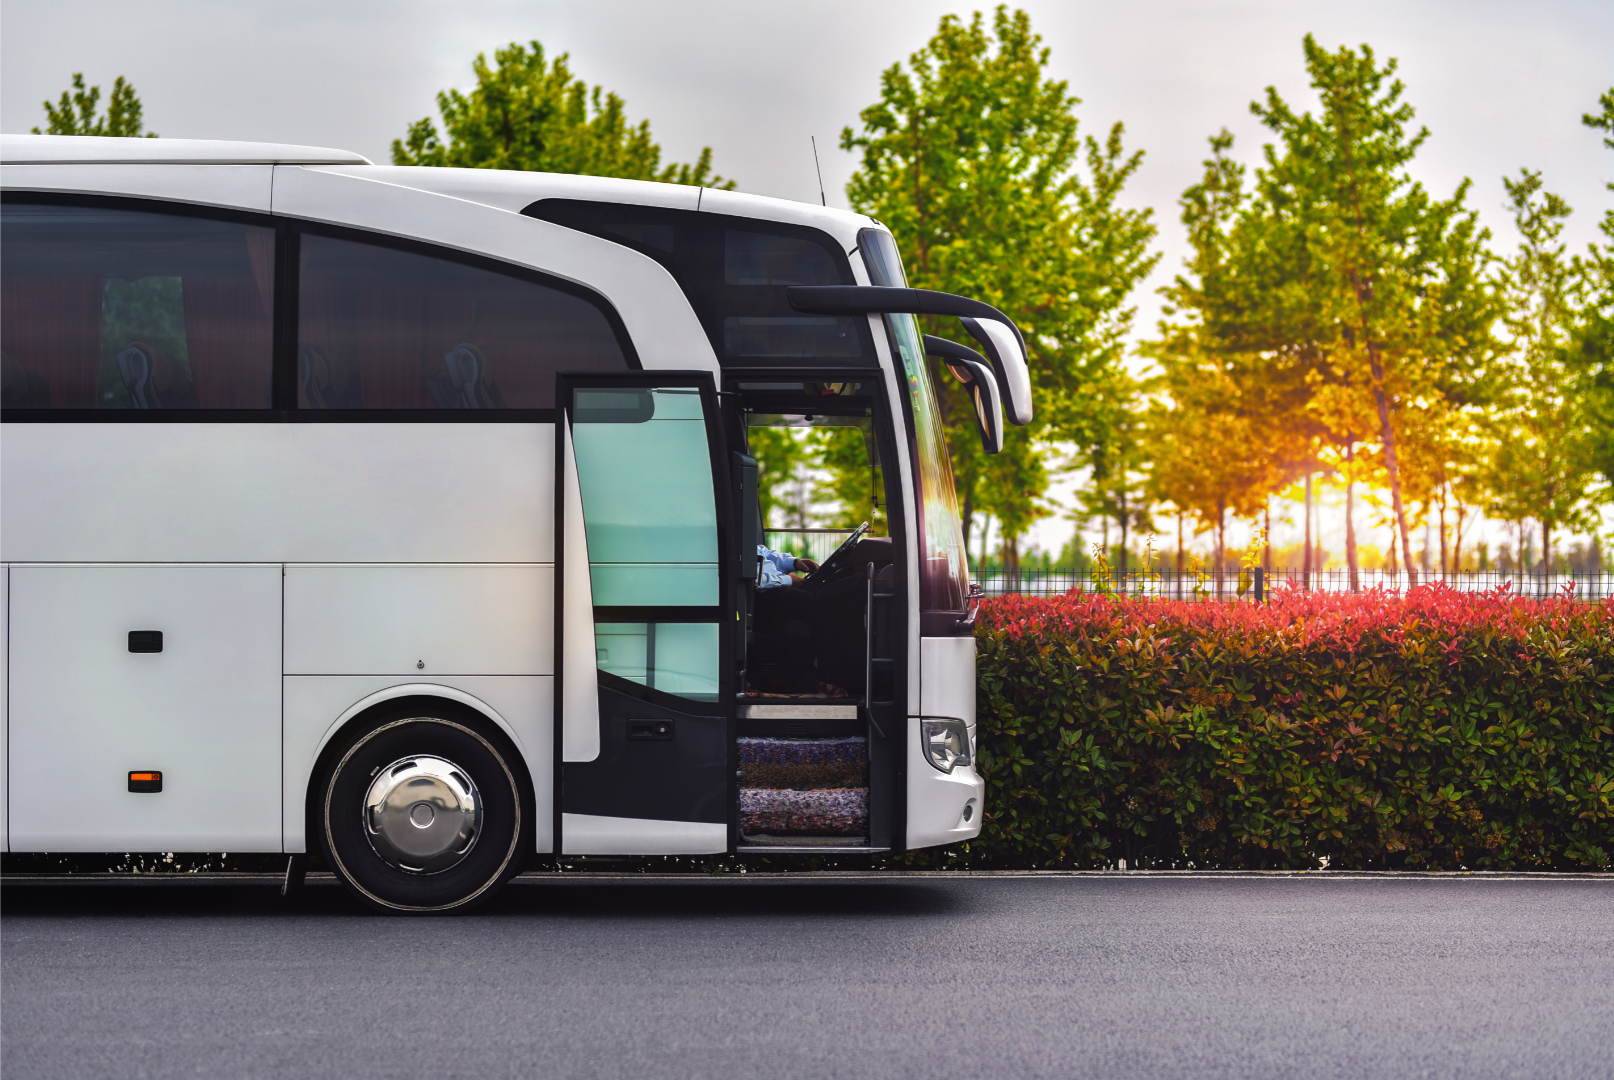 Bus rental is comfort and Convenience.